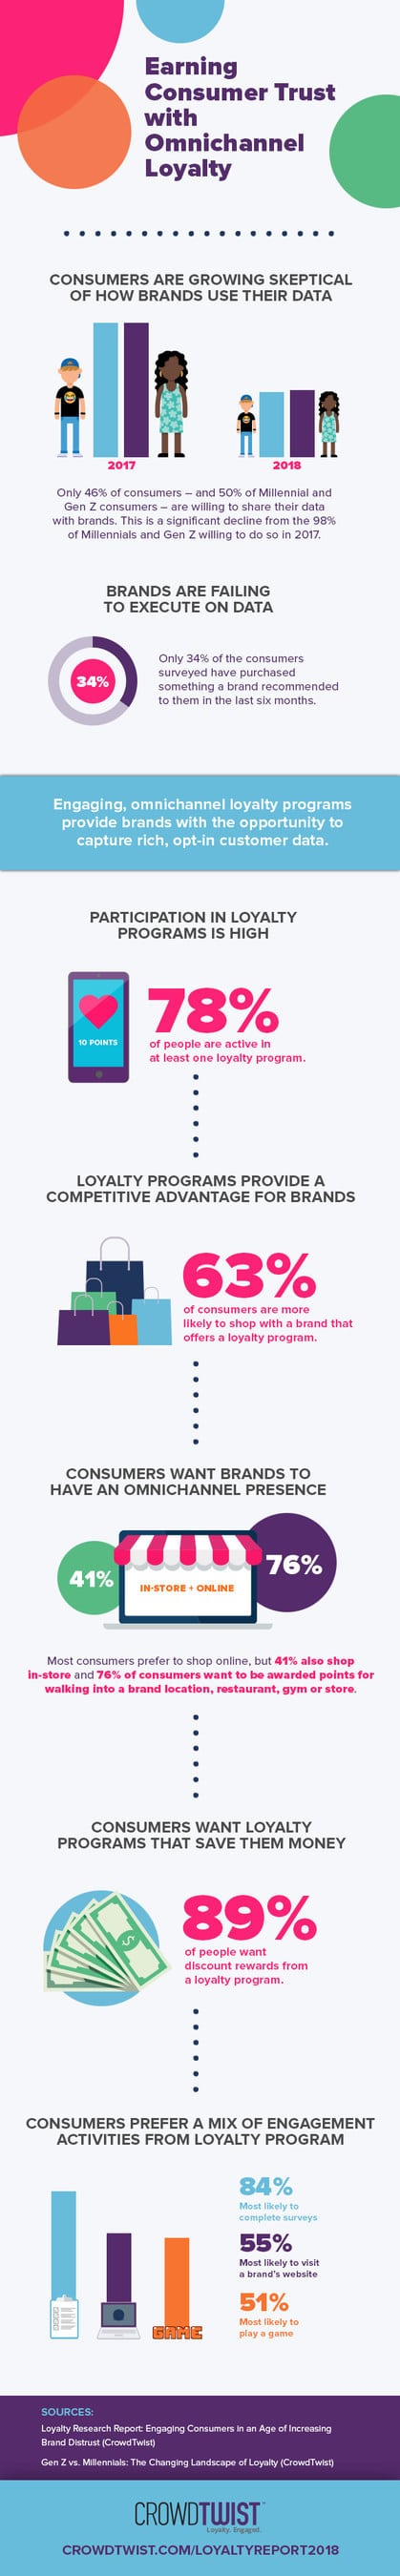 Consumer trust is crumbling, but brands can rebuild loyalty through relevancy